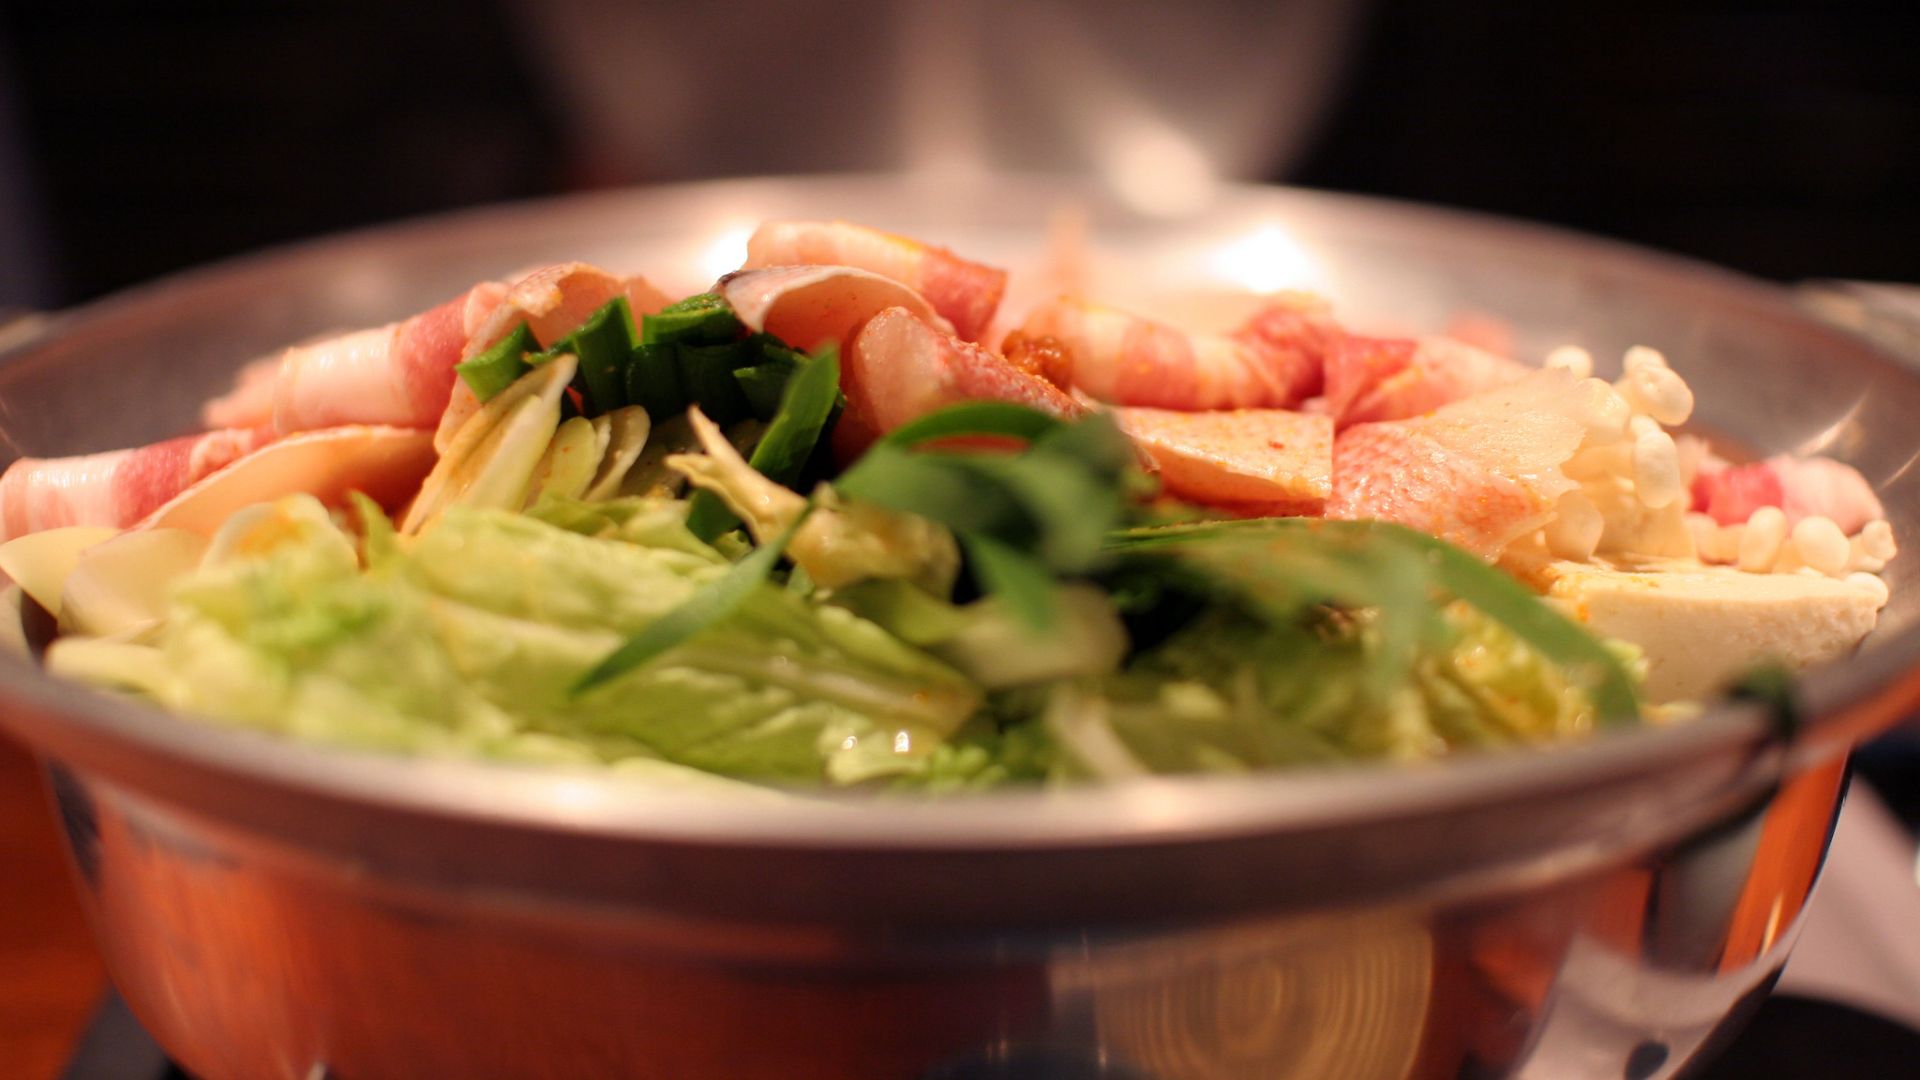 A Staple of Winter: The Origin and Types of Nabe